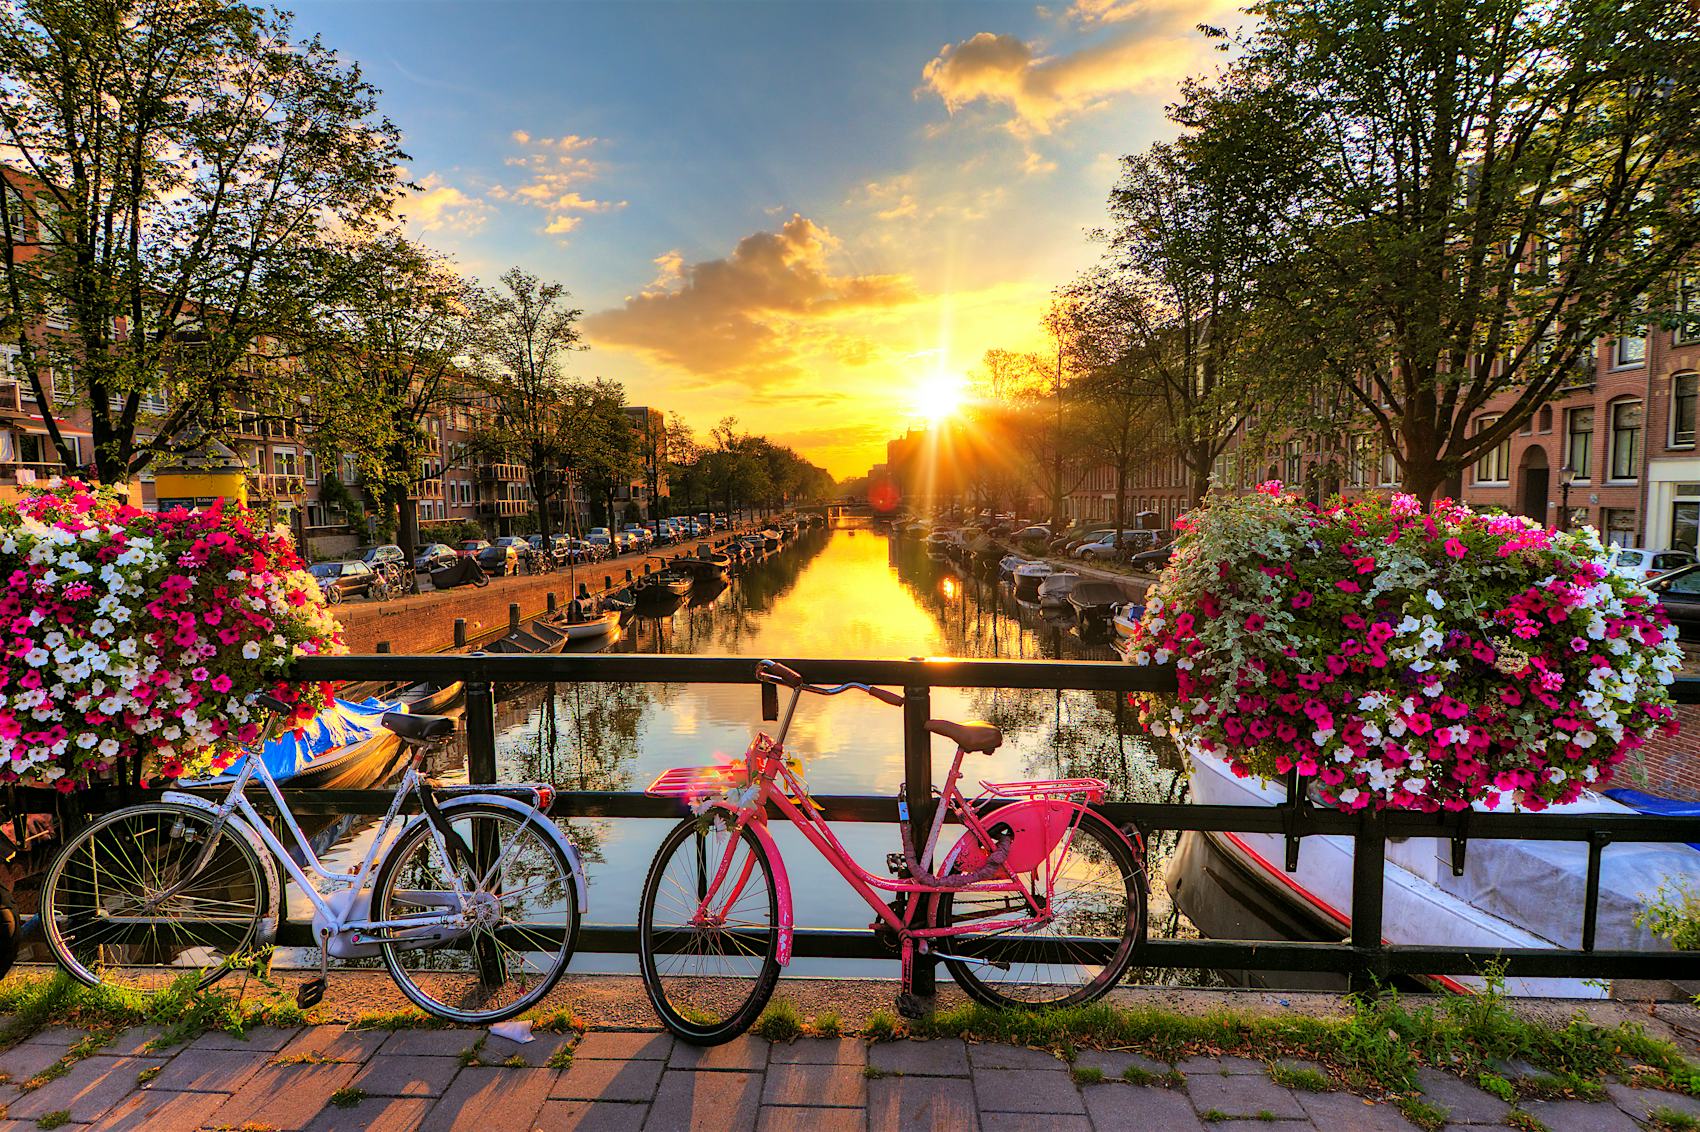 ''Beautiful sunrise over Amsterdam, The Netherlands, with flowers and bicycles on the bridge in spring''